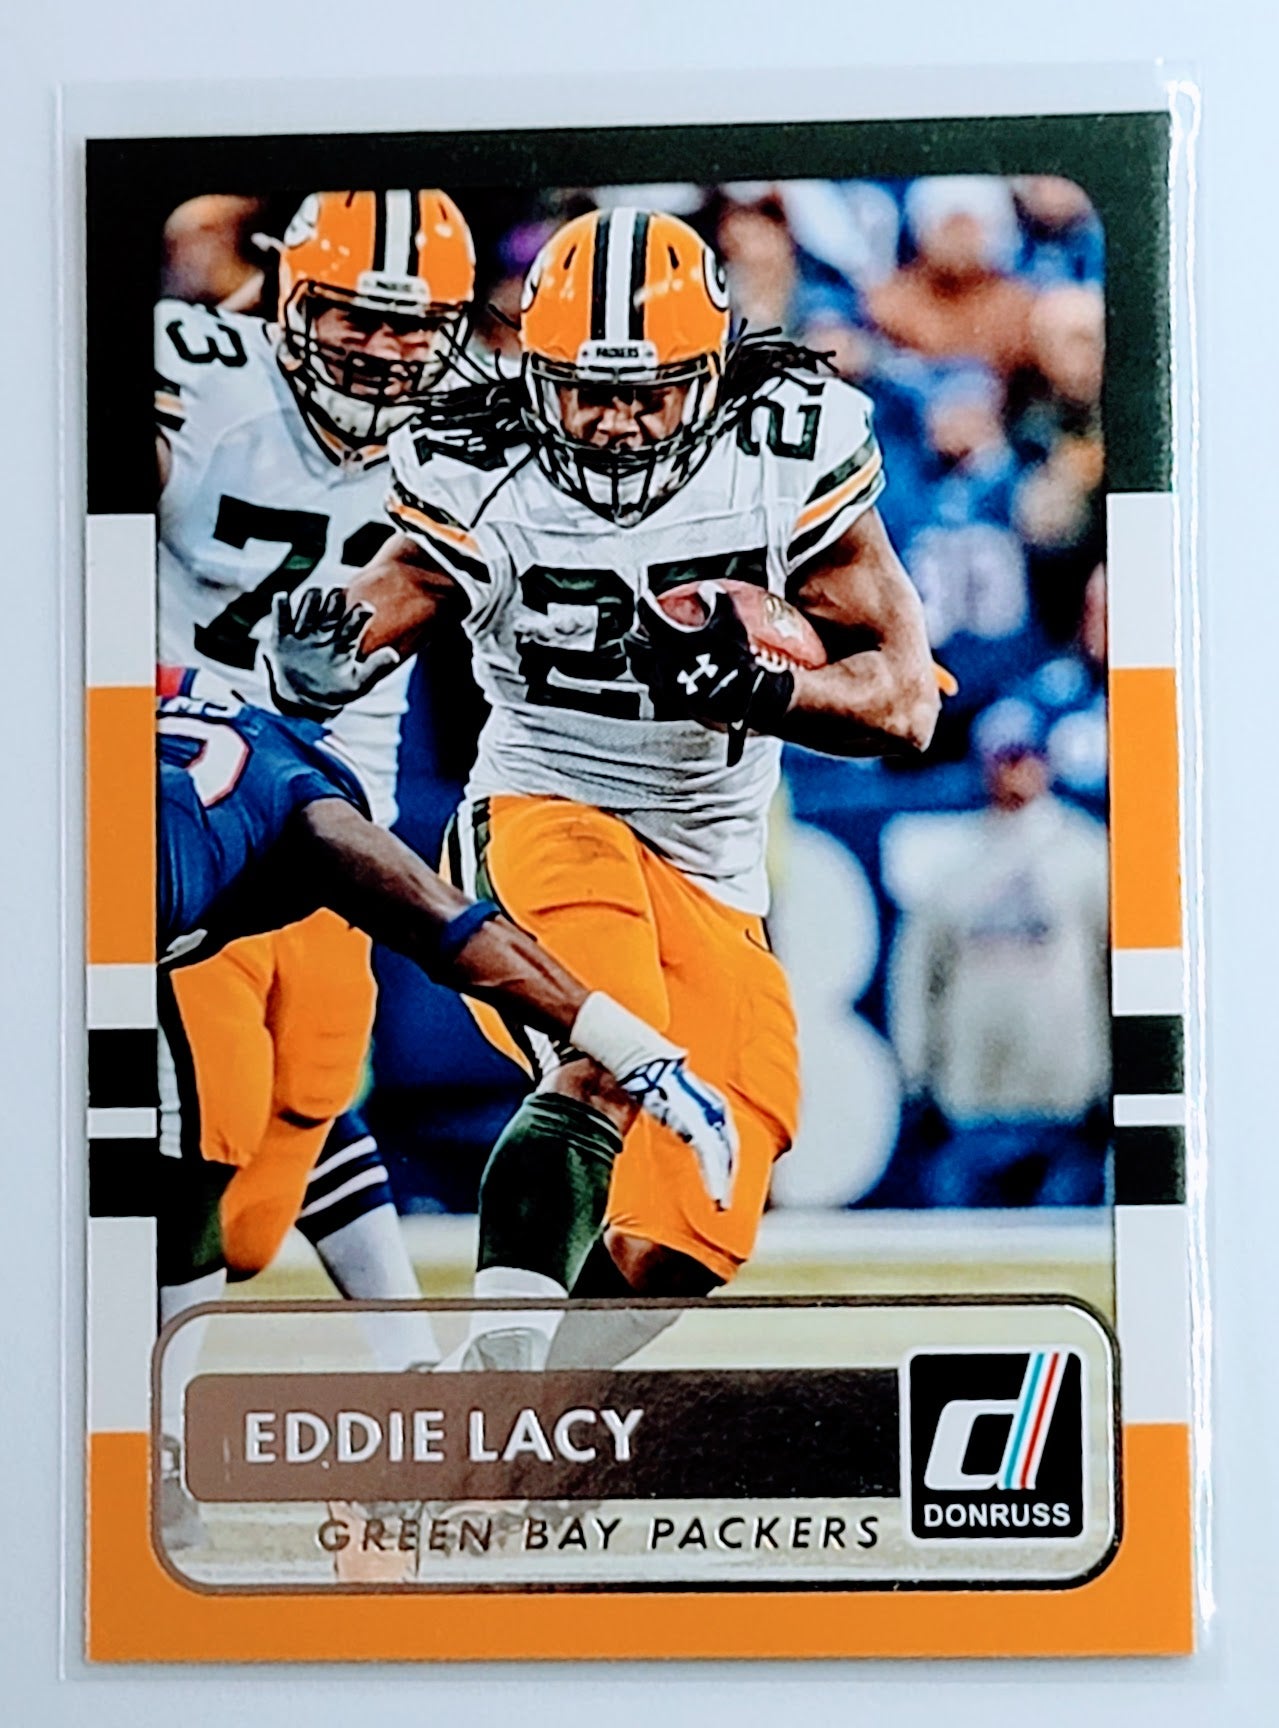 2015 Donruss Eddie Lacy Football Card  TH13C simple Xclusive Collectibles   